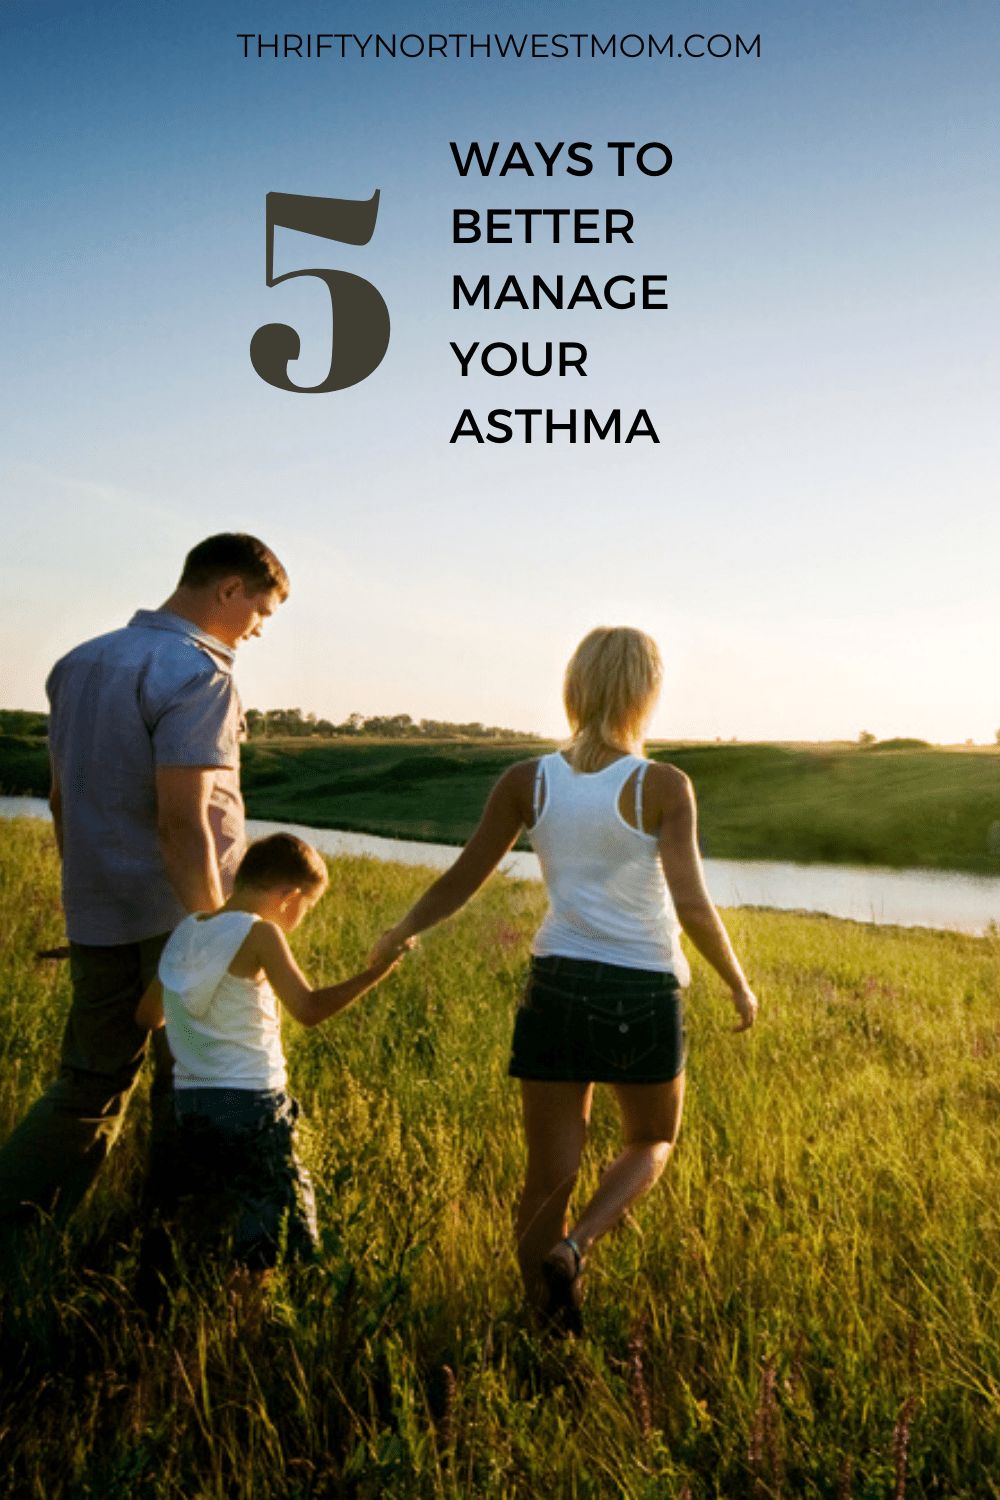 5 Tips for Better Asthma Management